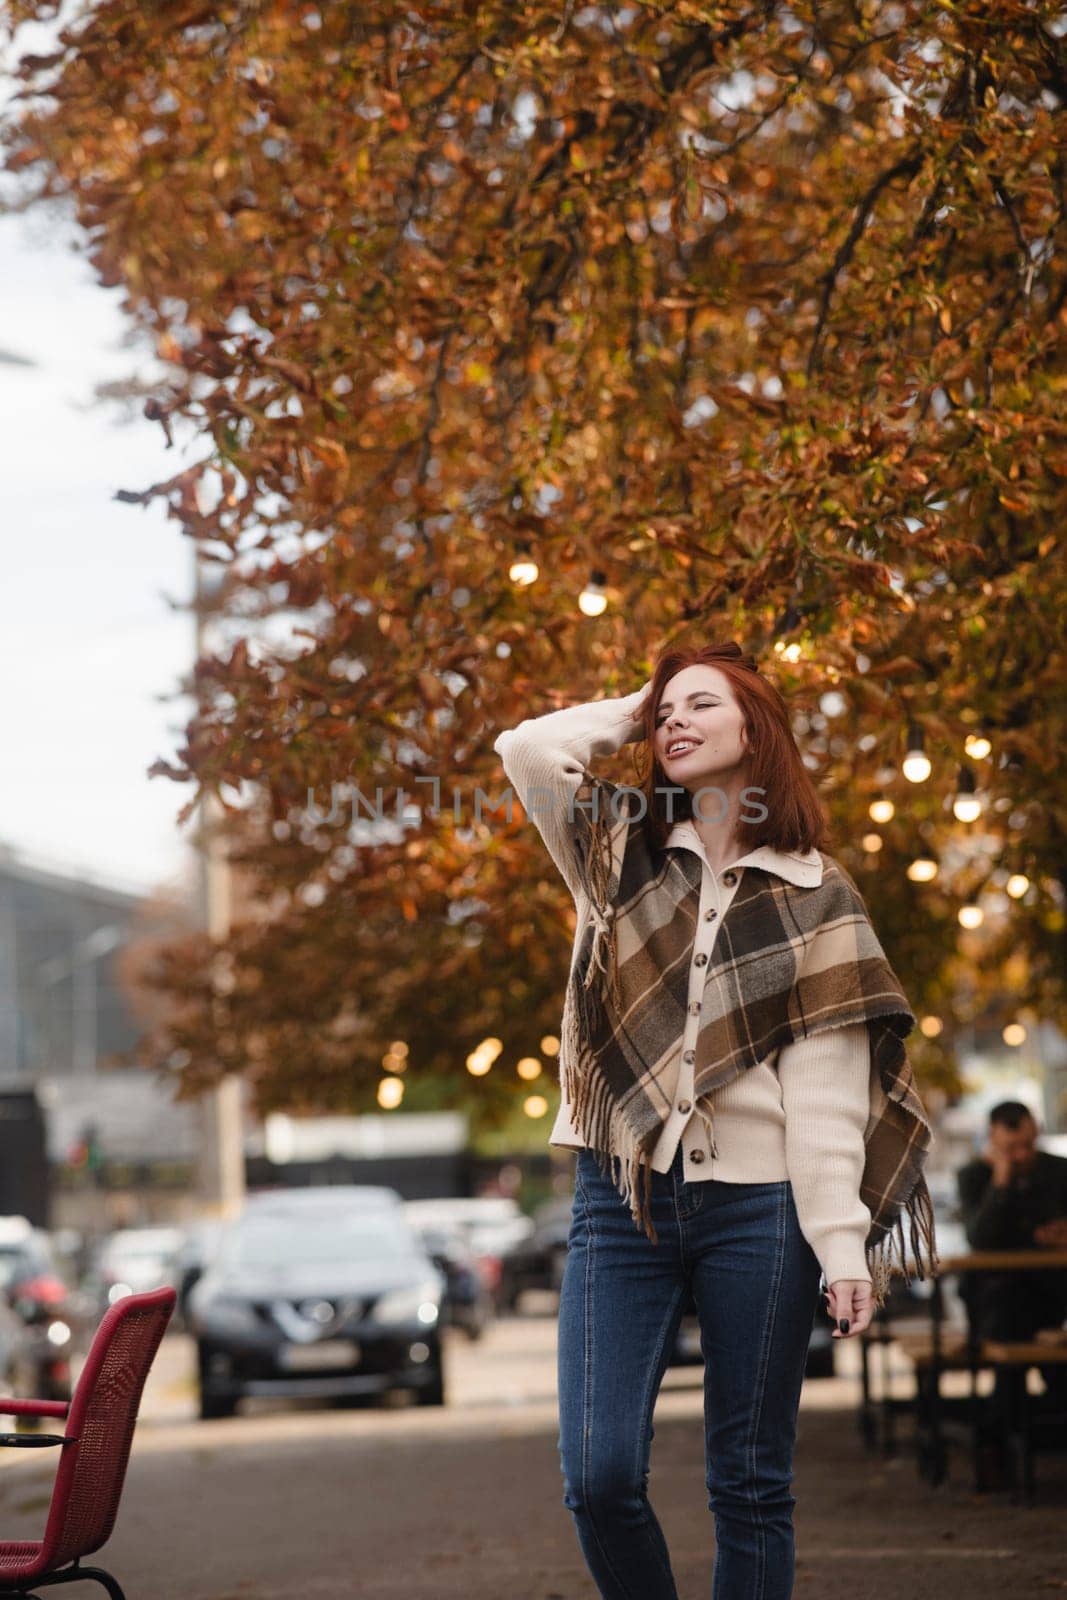 A merry red-haired girl radiates happiness as she walks through the autumn city streets. High quality photo